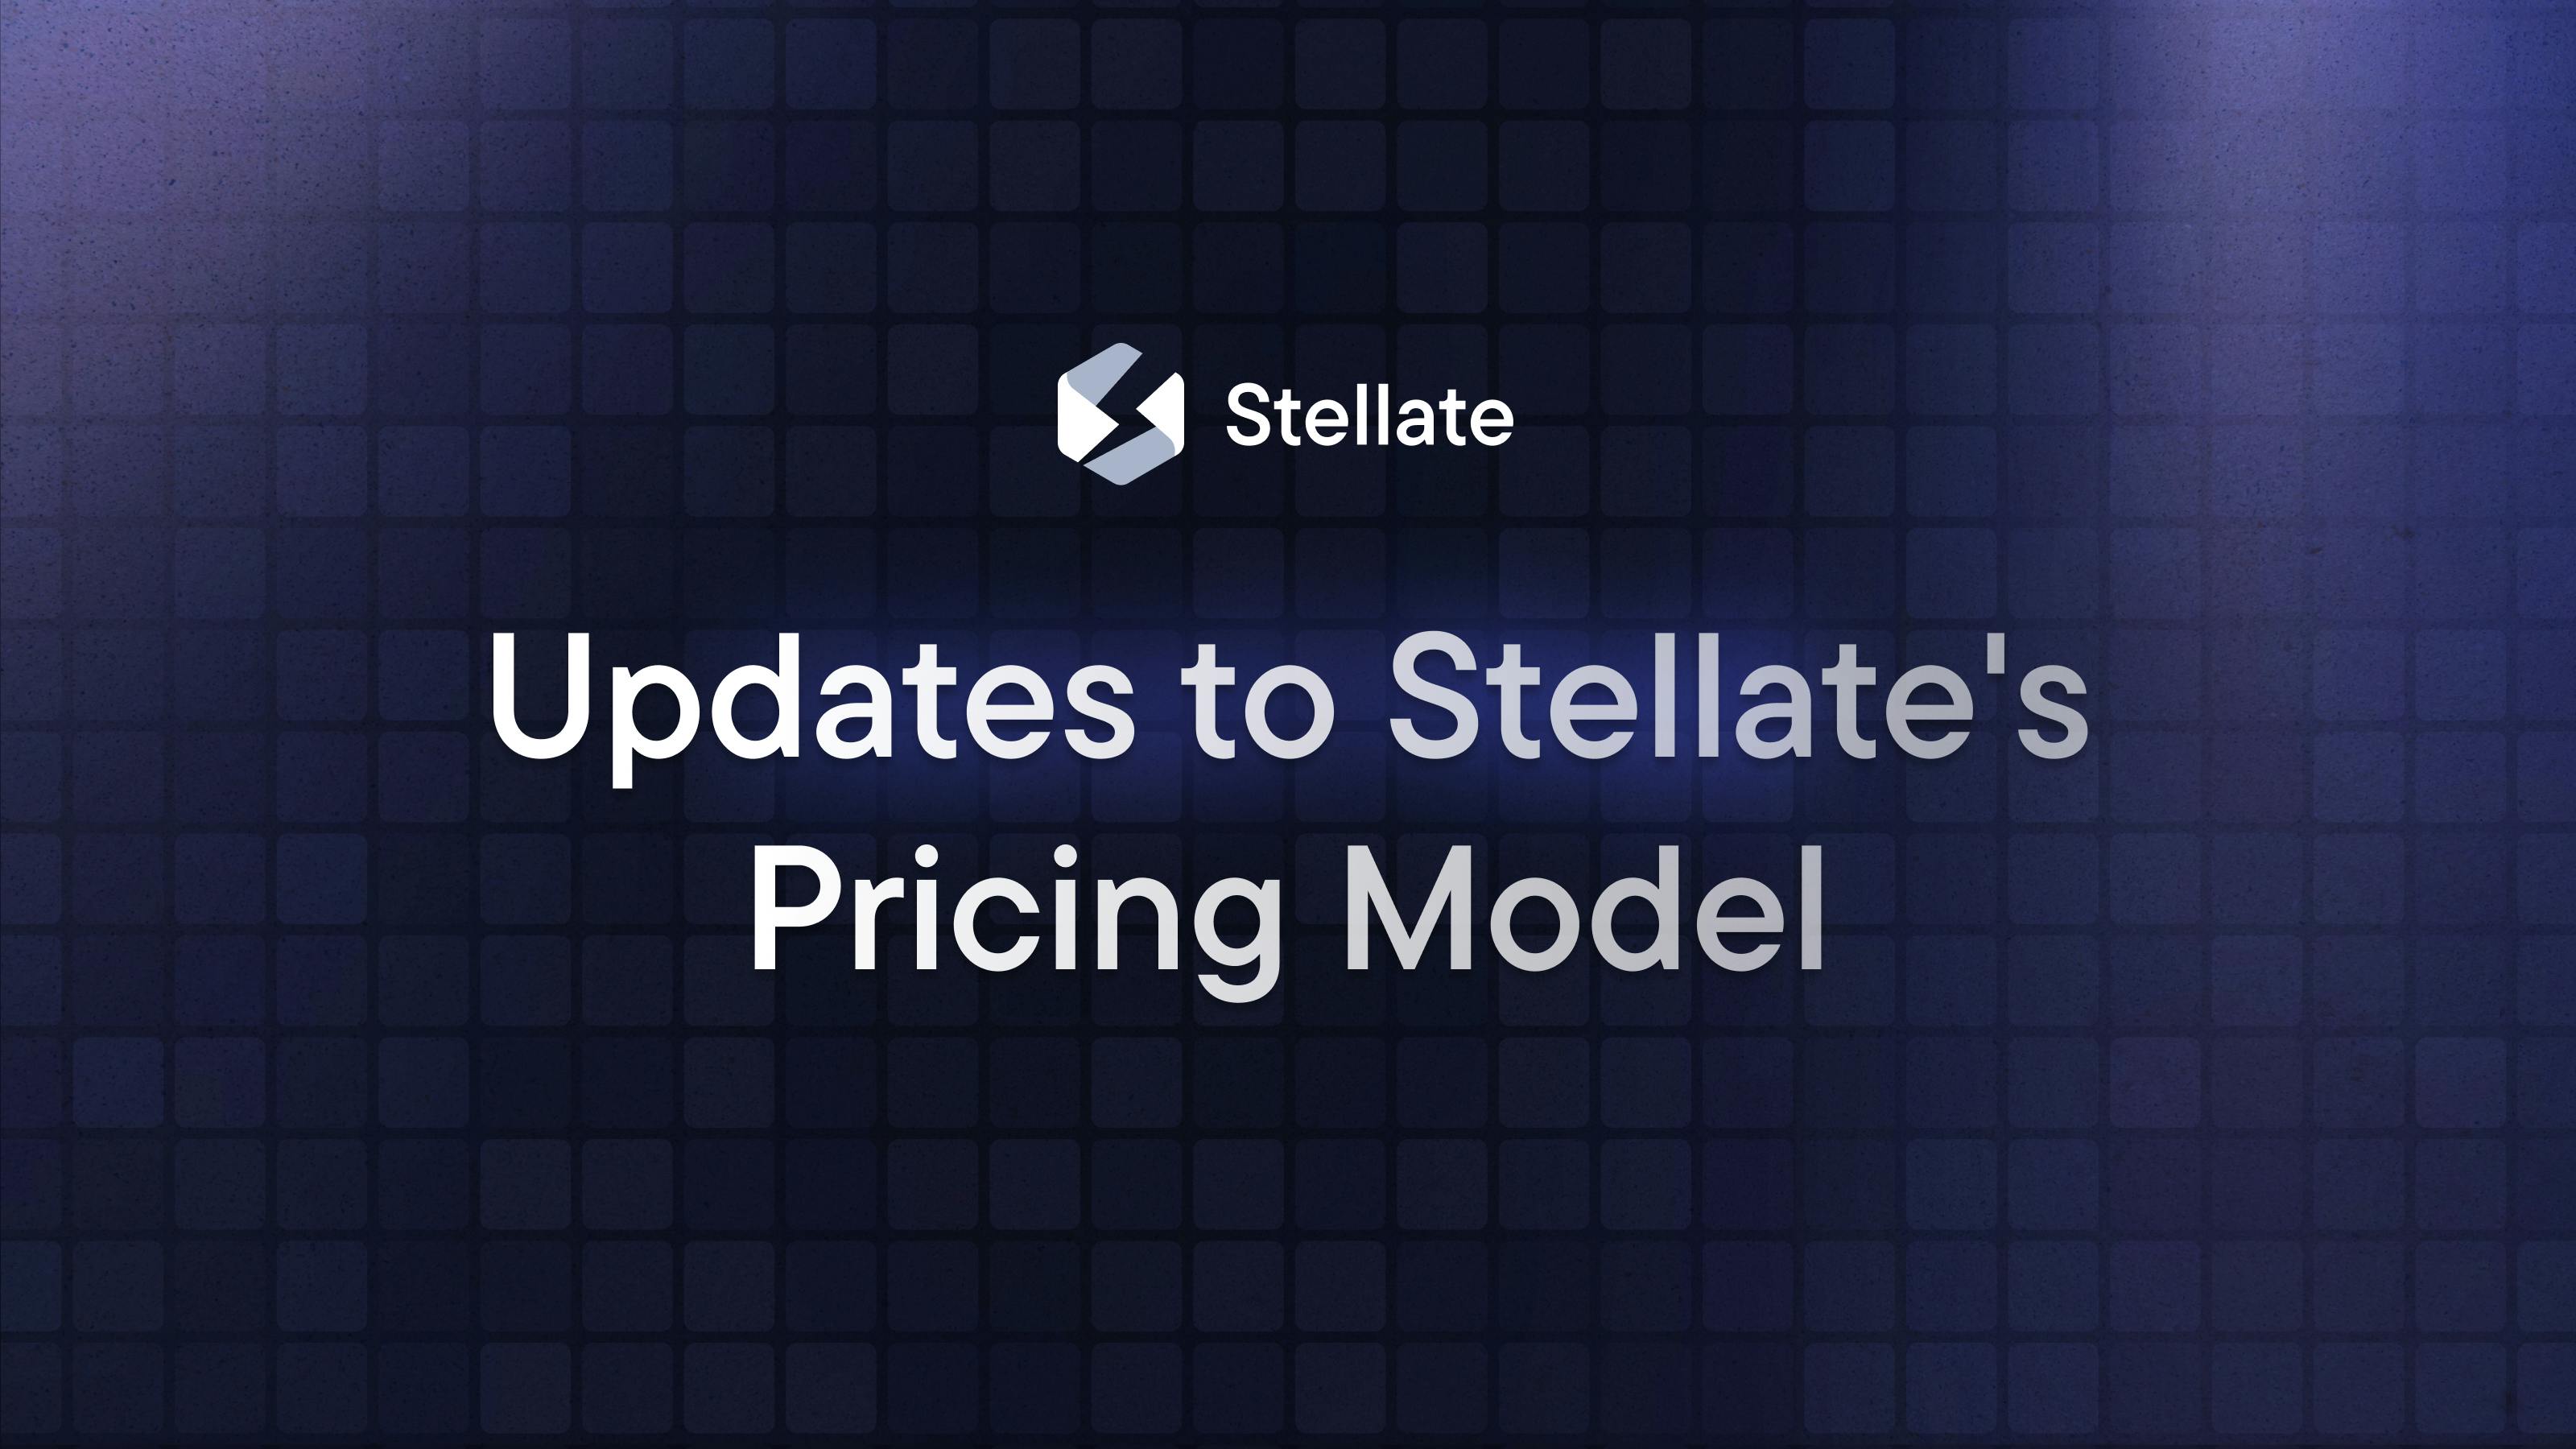 Updates to Stellate's Pricing Model